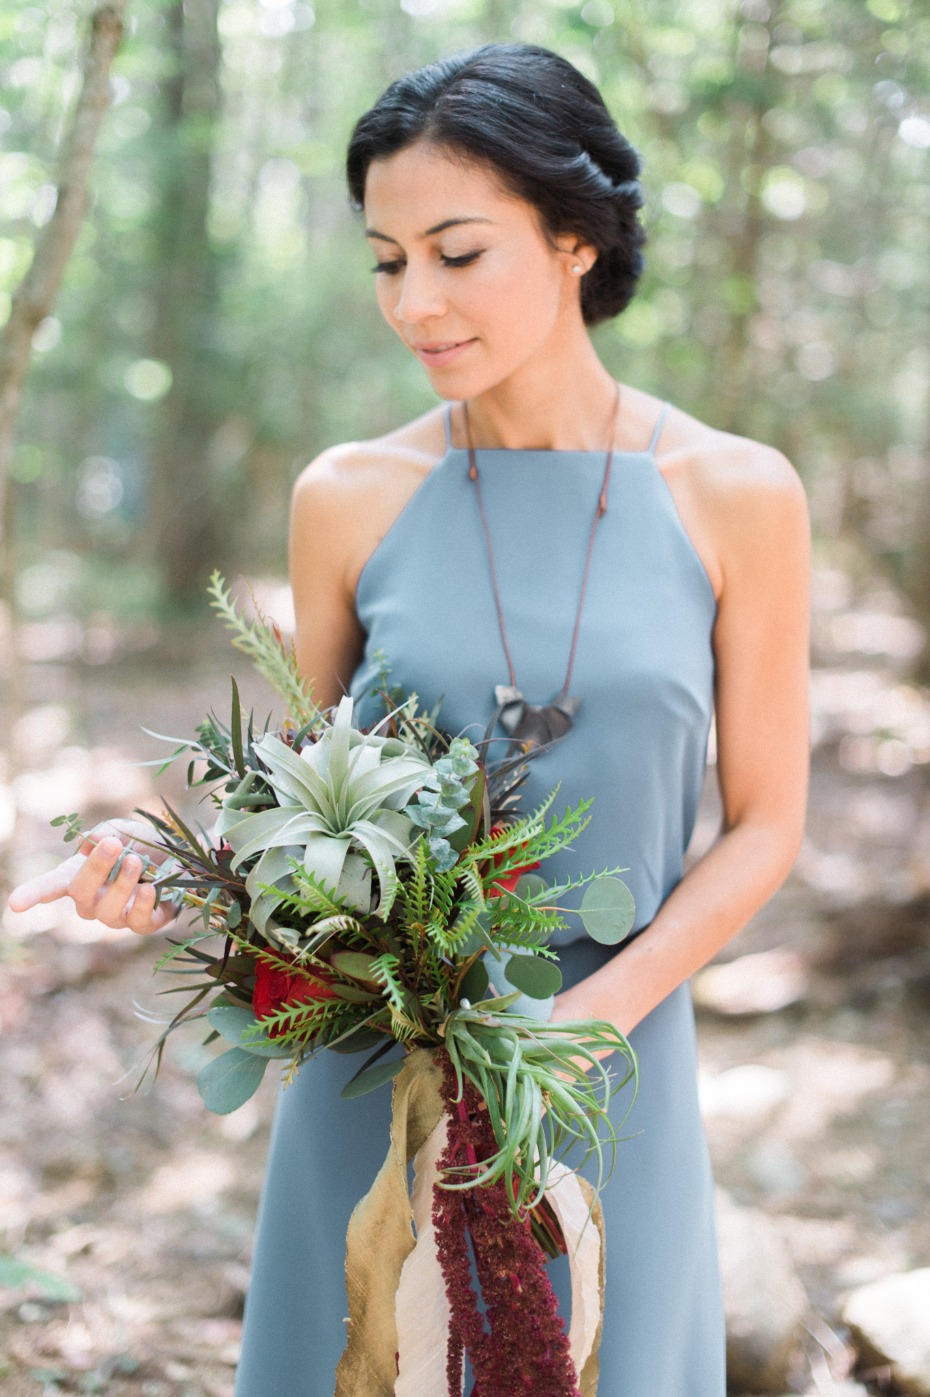 Bridesmaid in blue with air plant bouquet